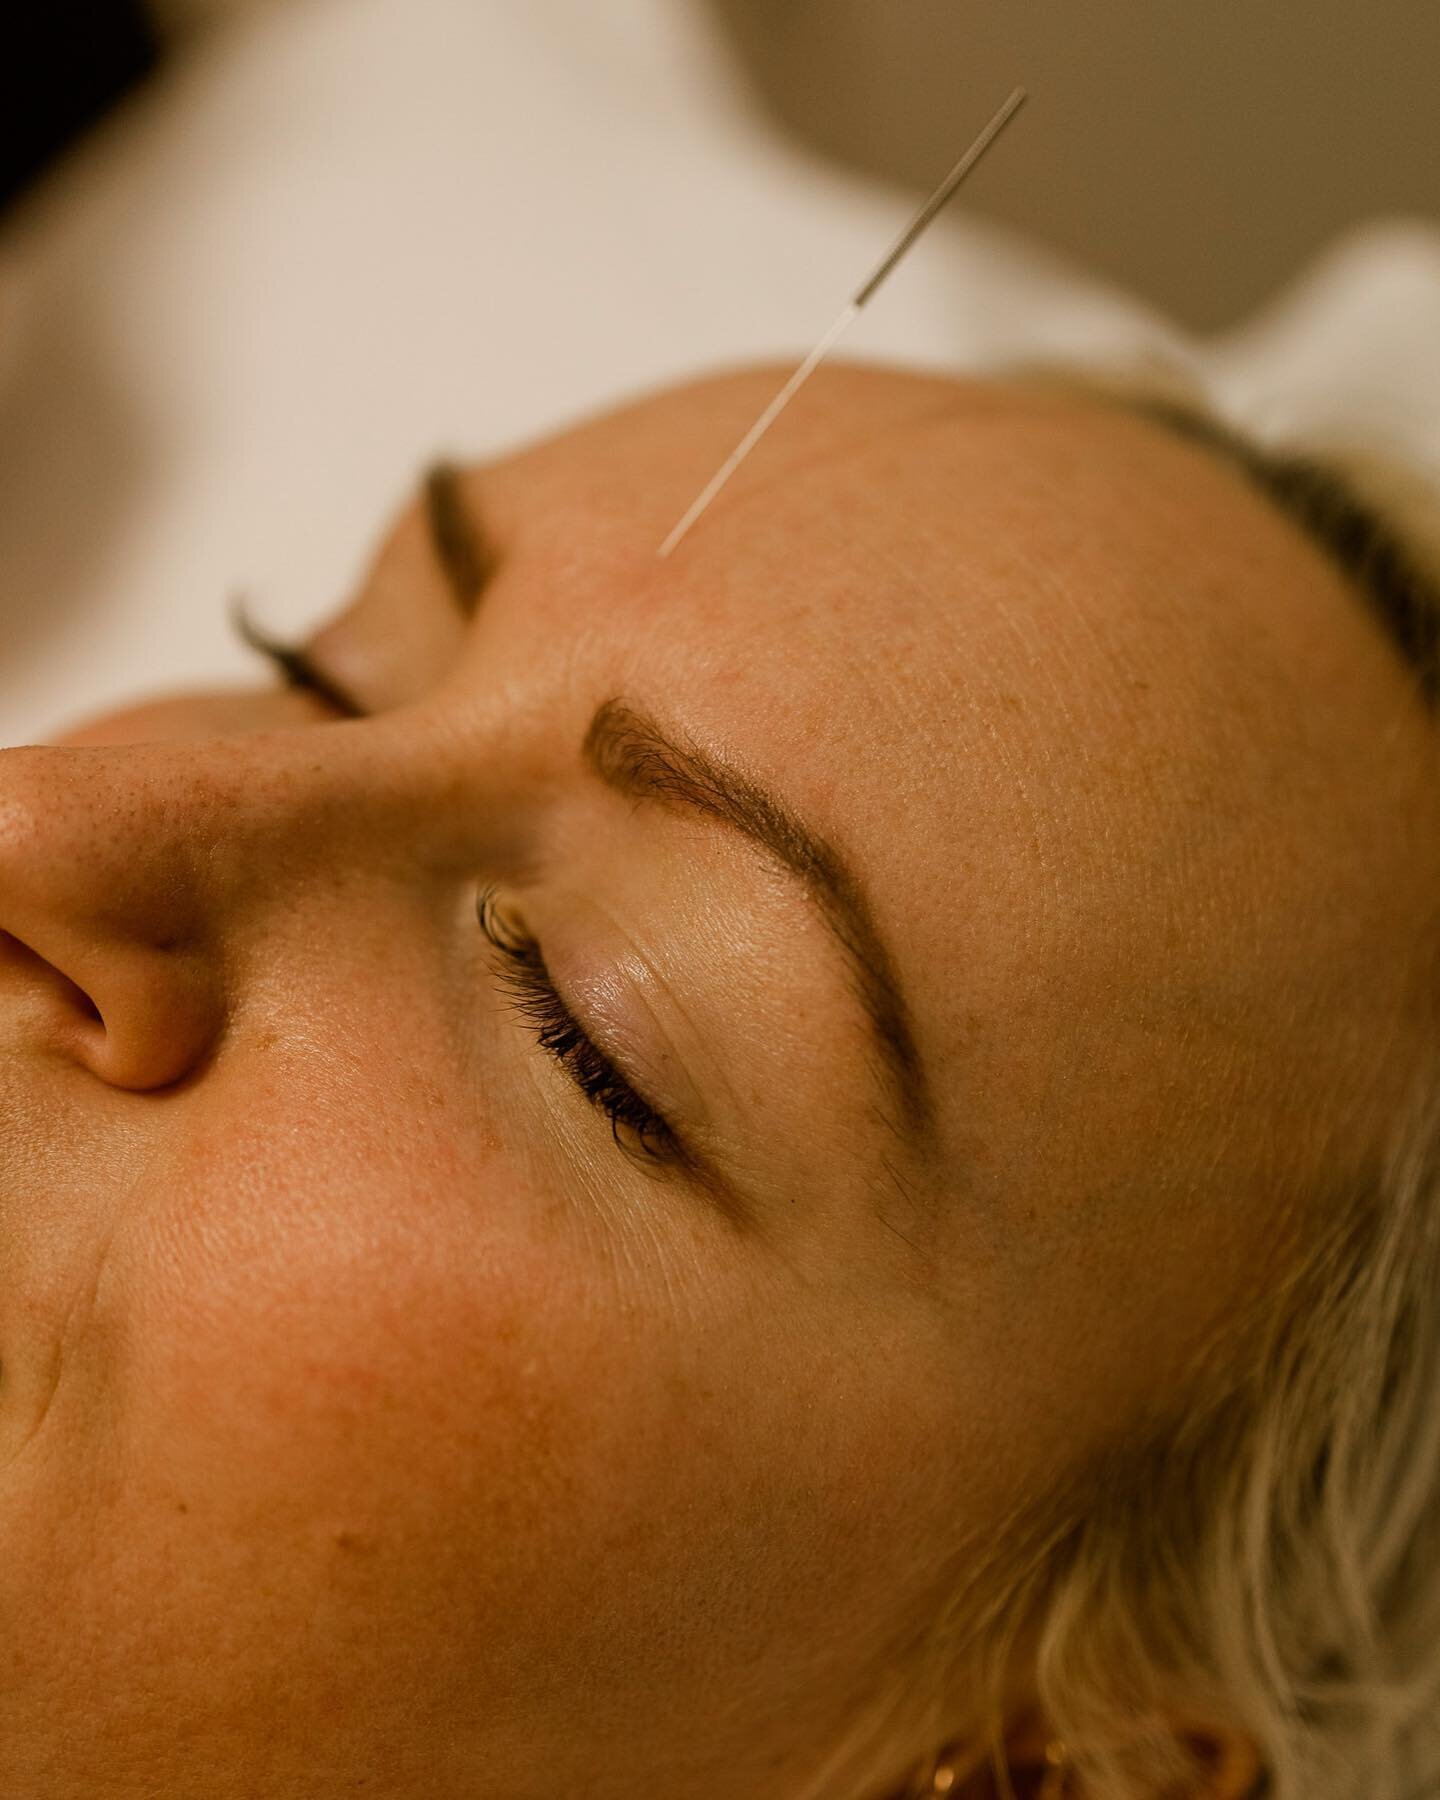 An acupuncture needle is as thin as a string of human hair, and as powerful as medication in treating health concerns.

These small yet mighty needles aid your body in the production of natural painkilling chemicals, increasing your blood flow and de